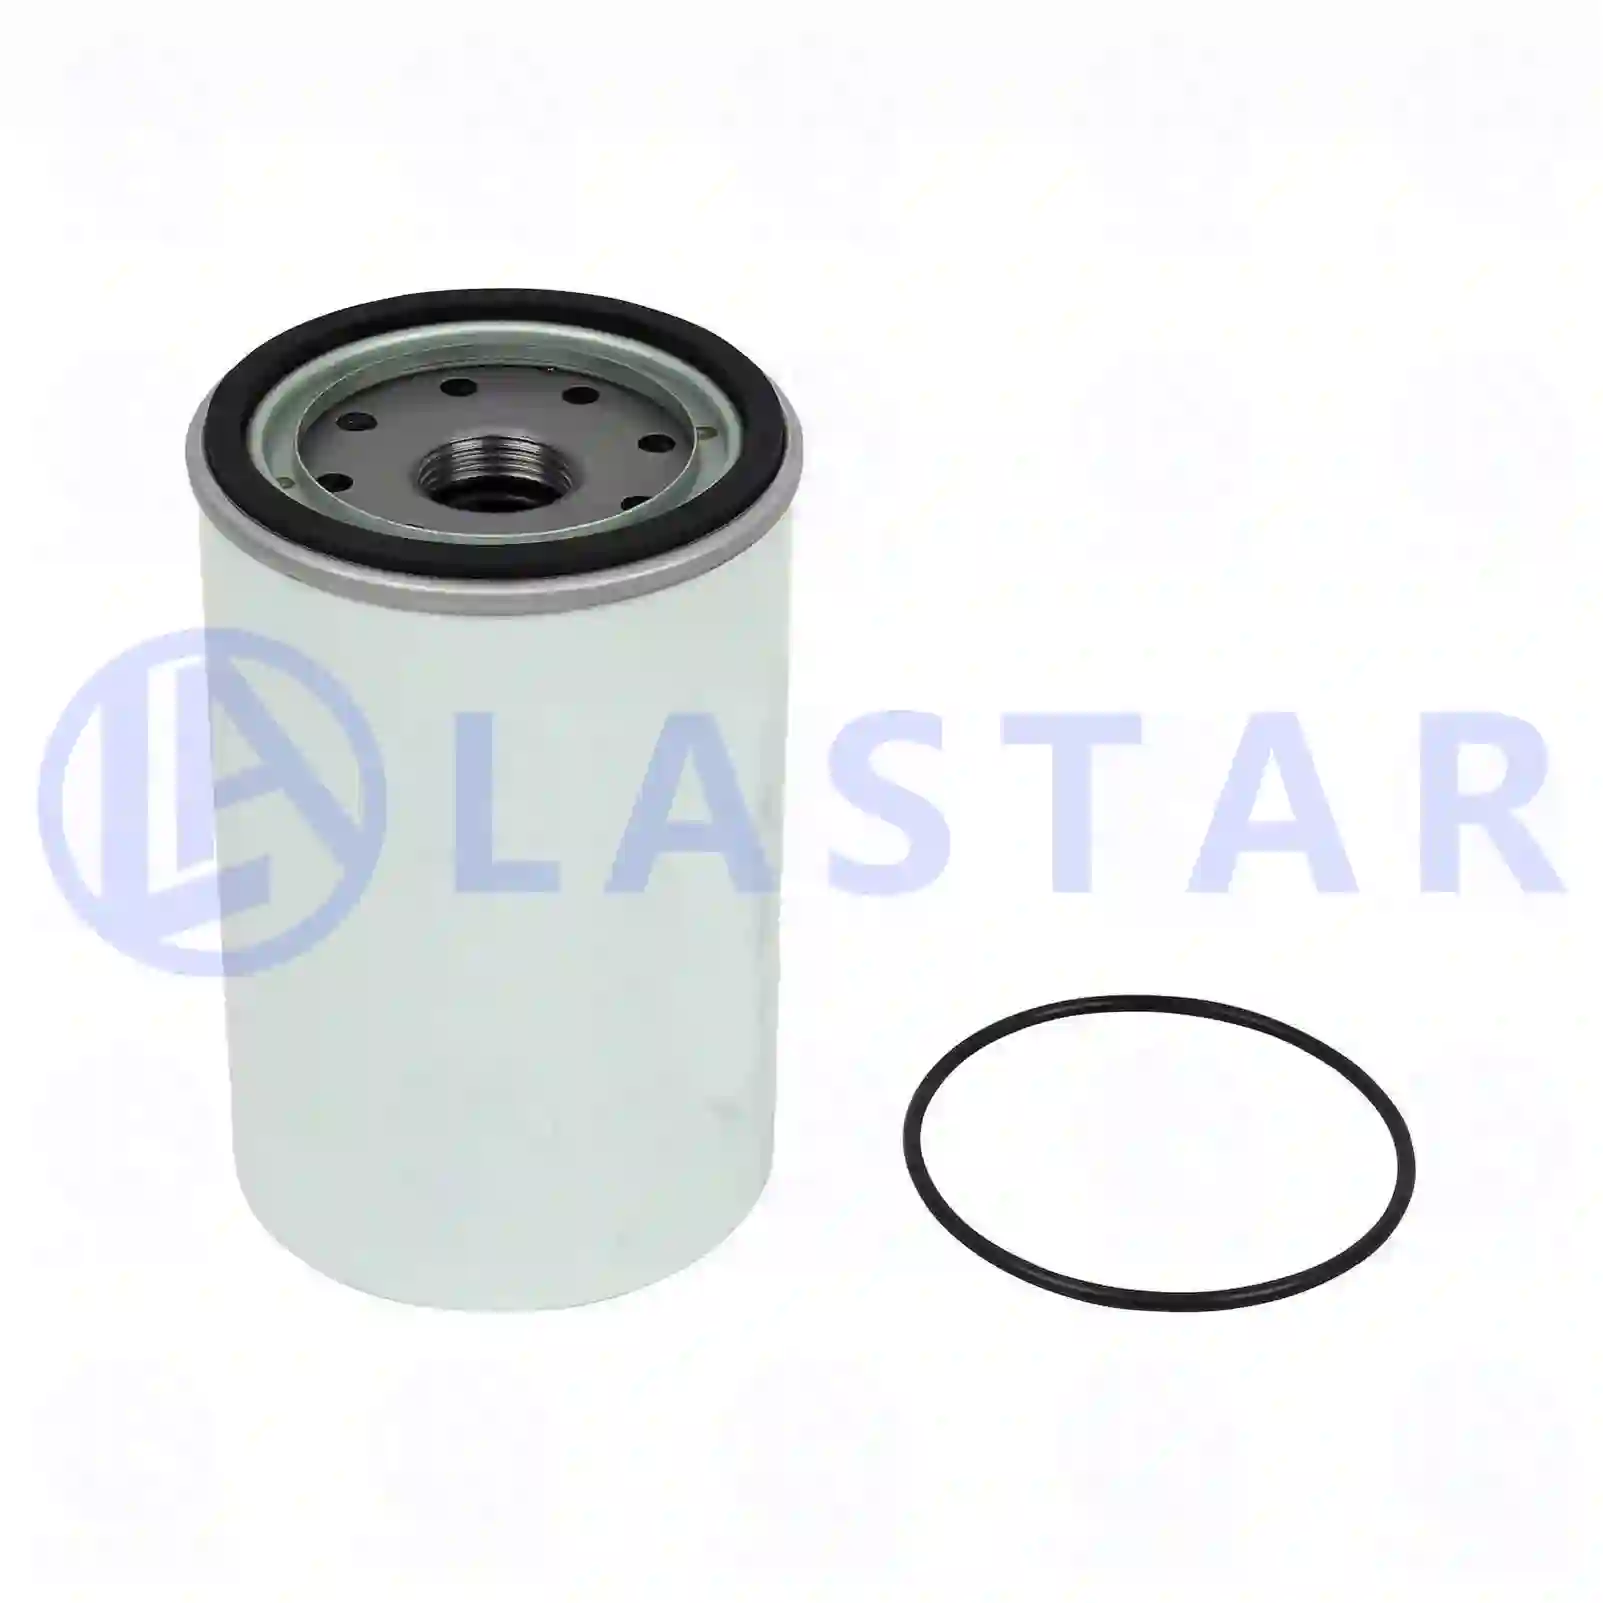 Fuel filter, water separator, 77723941, 7420514654, 7420541383, 7420998634, 7420514654, 20480593, 20514654, 20541383, 20998346, 20998367, ZG10155-0008 ||  77723941 Lastar Spare Part | Truck Spare Parts, Auotomotive Spare Parts Fuel filter, water separator, 77723941, 7420514654, 7420541383, 7420998634, 7420514654, 20480593, 20514654, 20541383, 20998346, 20998367, ZG10155-0008 ||  77723941 Lastar Spare Part | Truck Spare Parts, Auotomotive Spare Parts